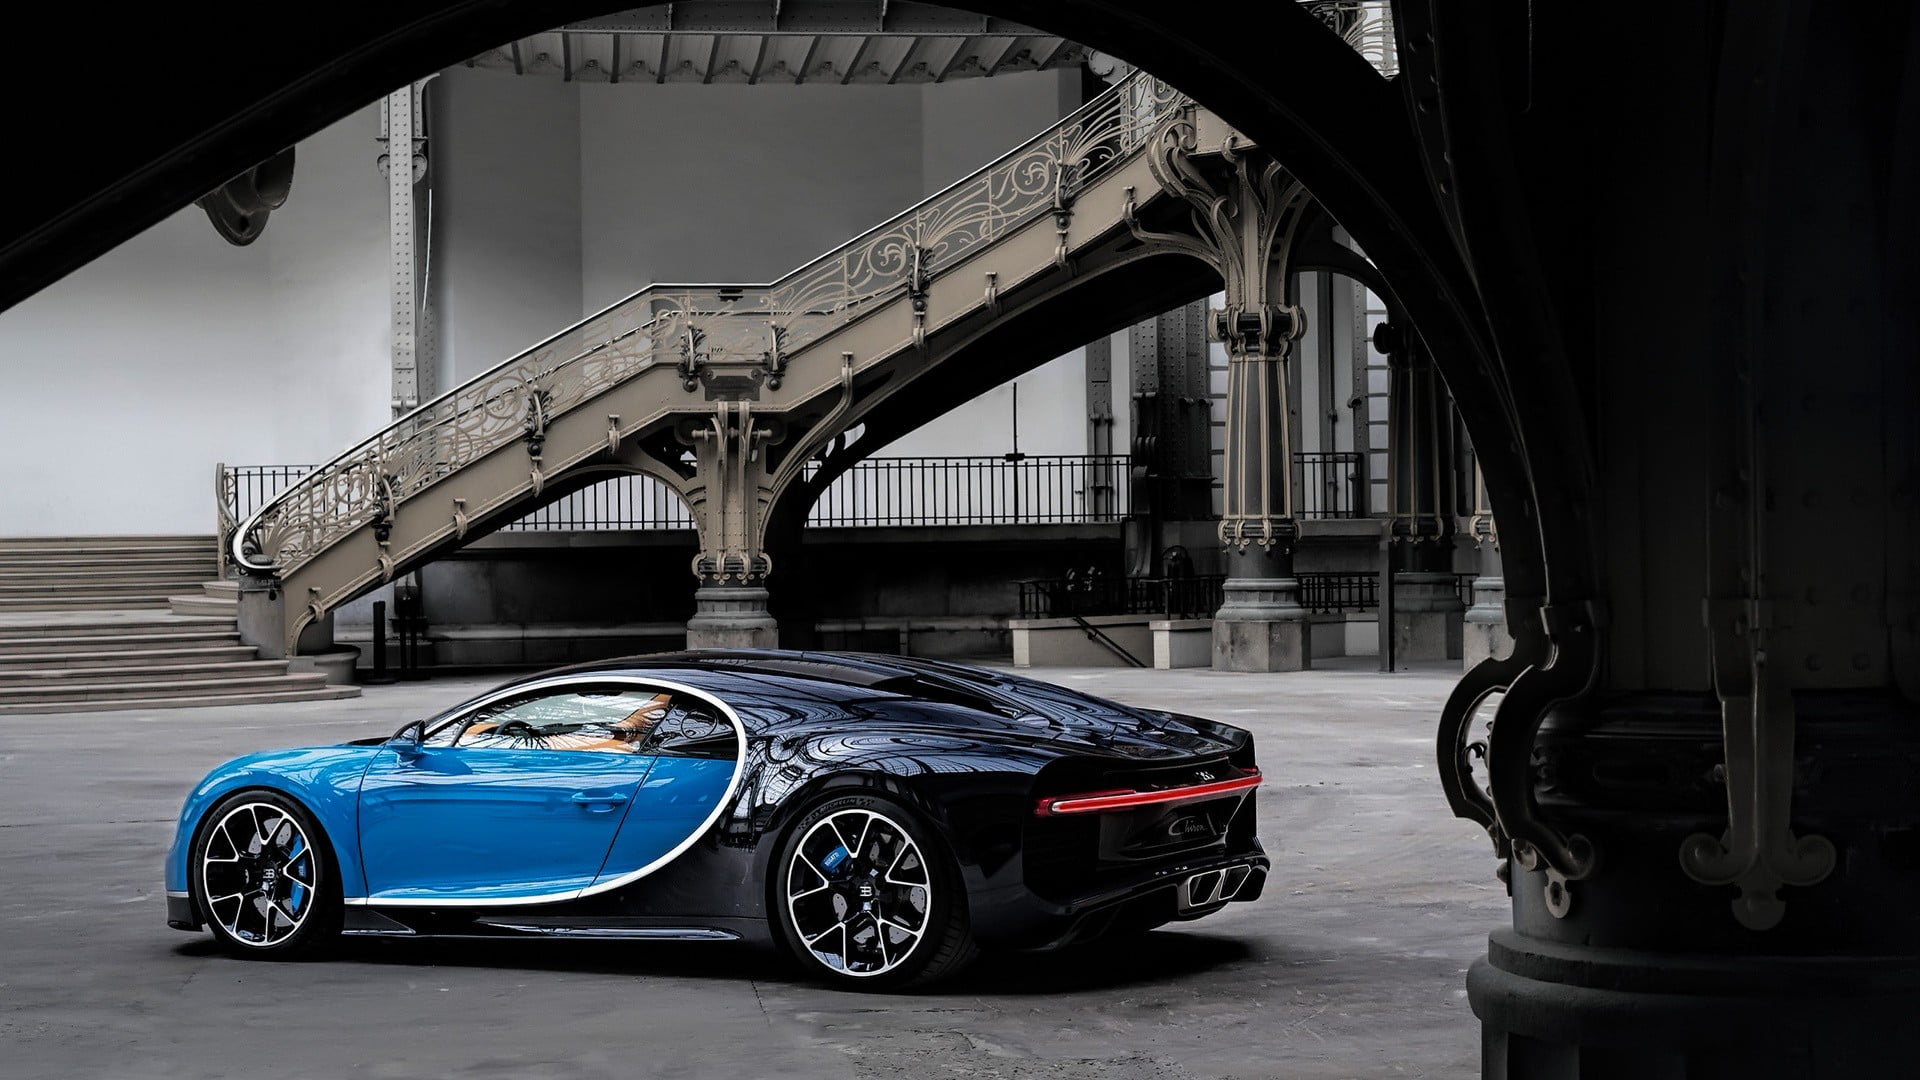 blue and black sports coupe, car, sports car, supercars, urban